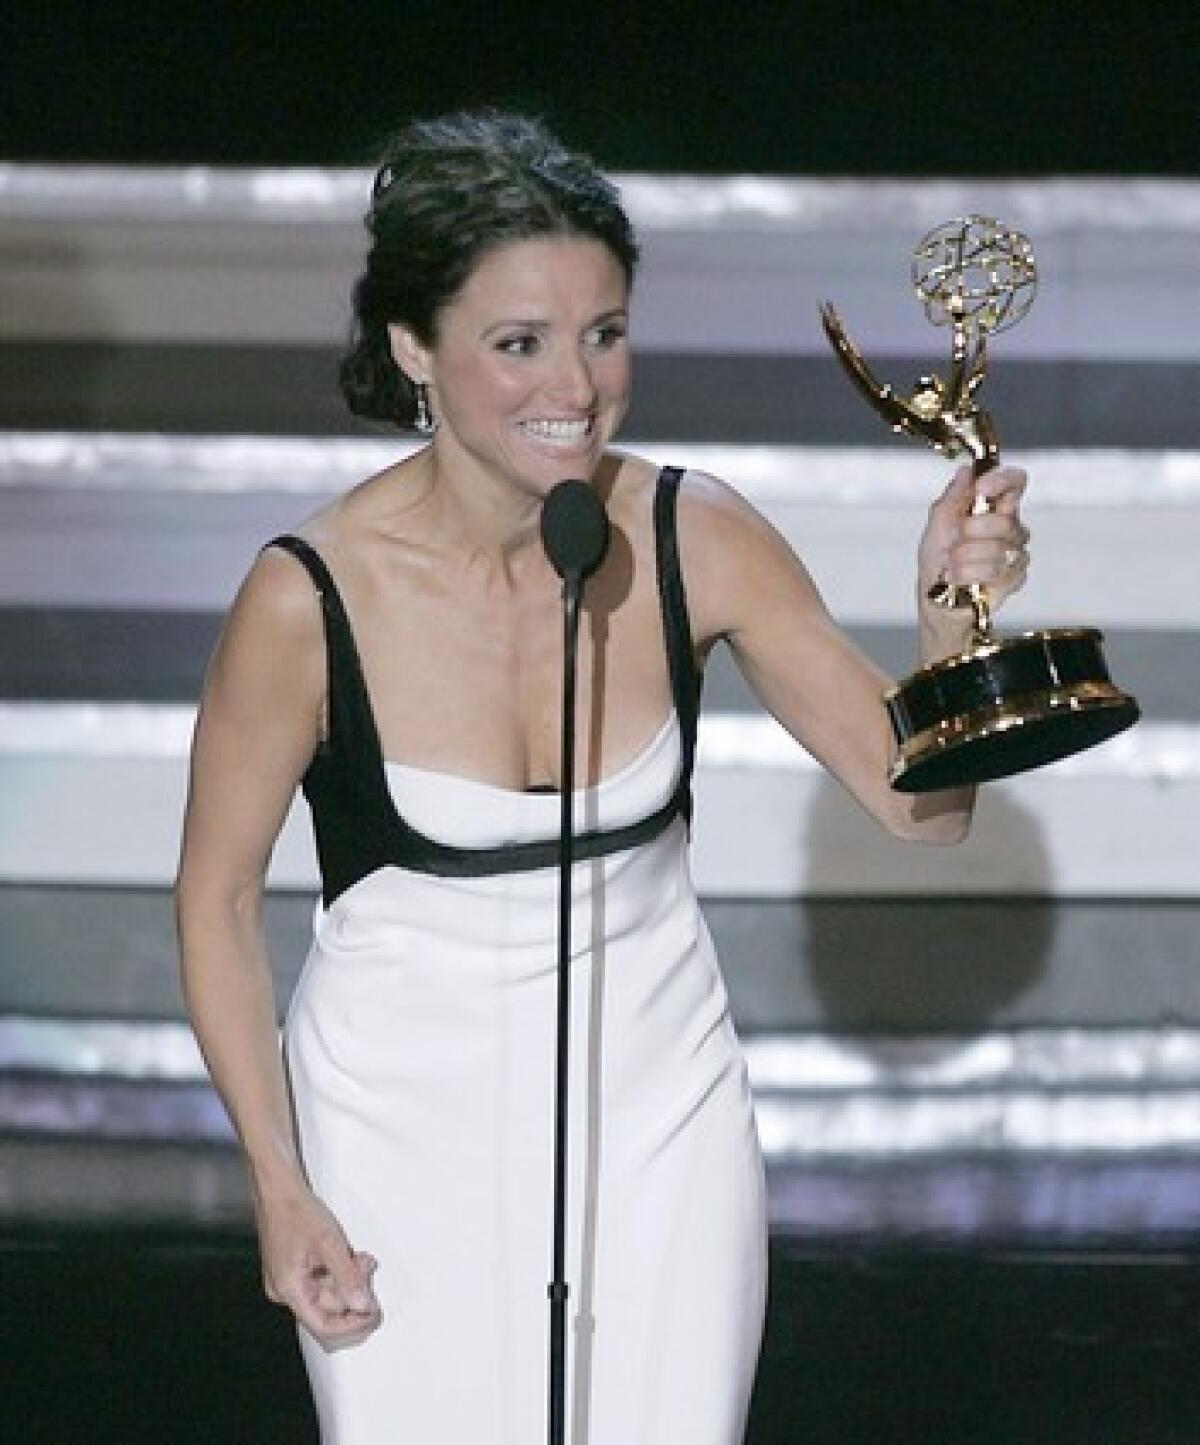 Julia Louis-Dreyfus wins her second Emmy, breaking the so-called "Seinfeld curse," in 2006.